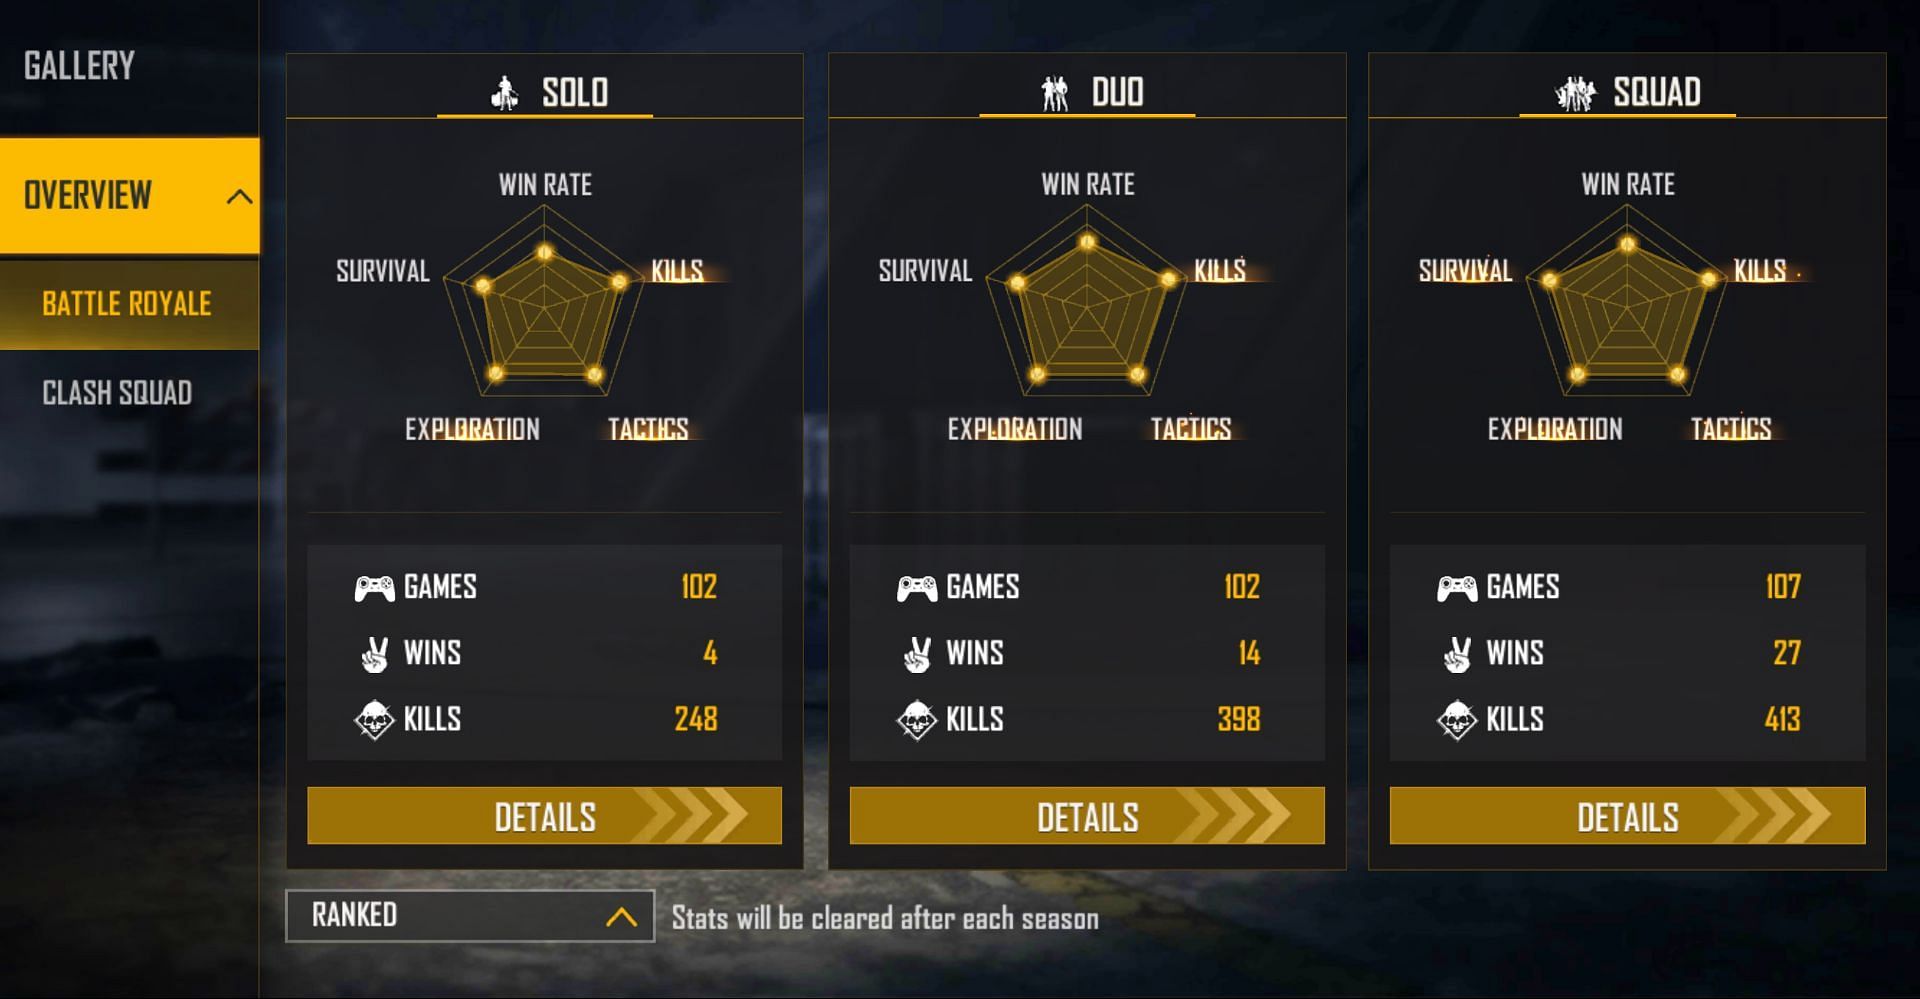 Desi Gamers has achieved over 400 kills in squad games (Image via Free Fire)